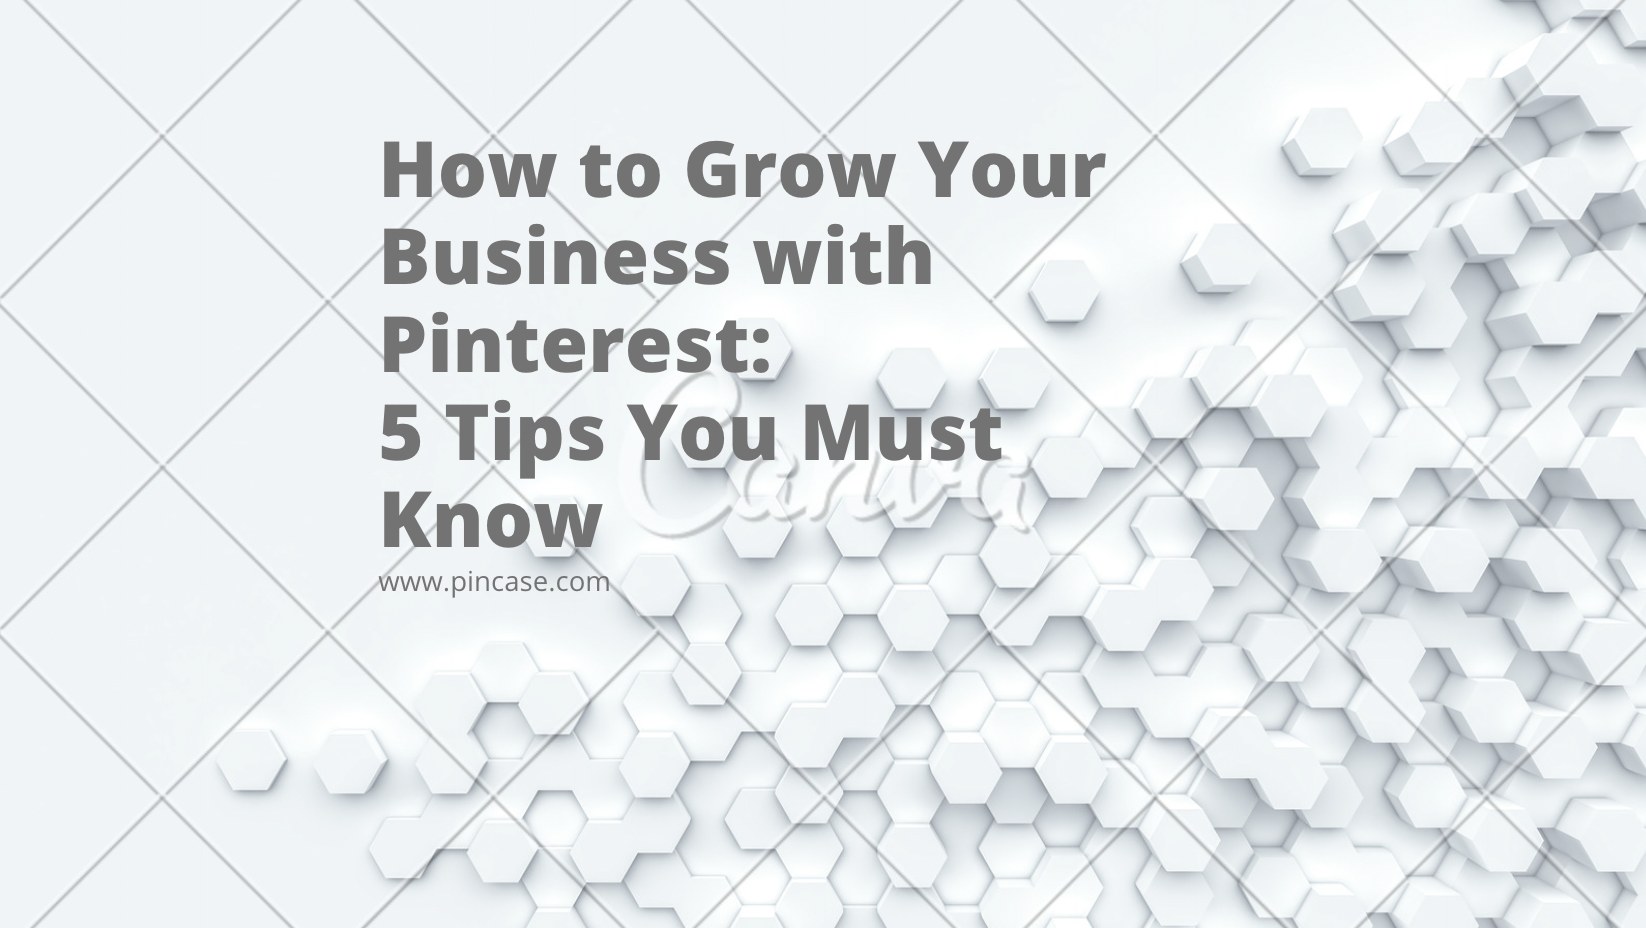 How to Grow Your Business with Pinterest: 5 Tips You Must Know